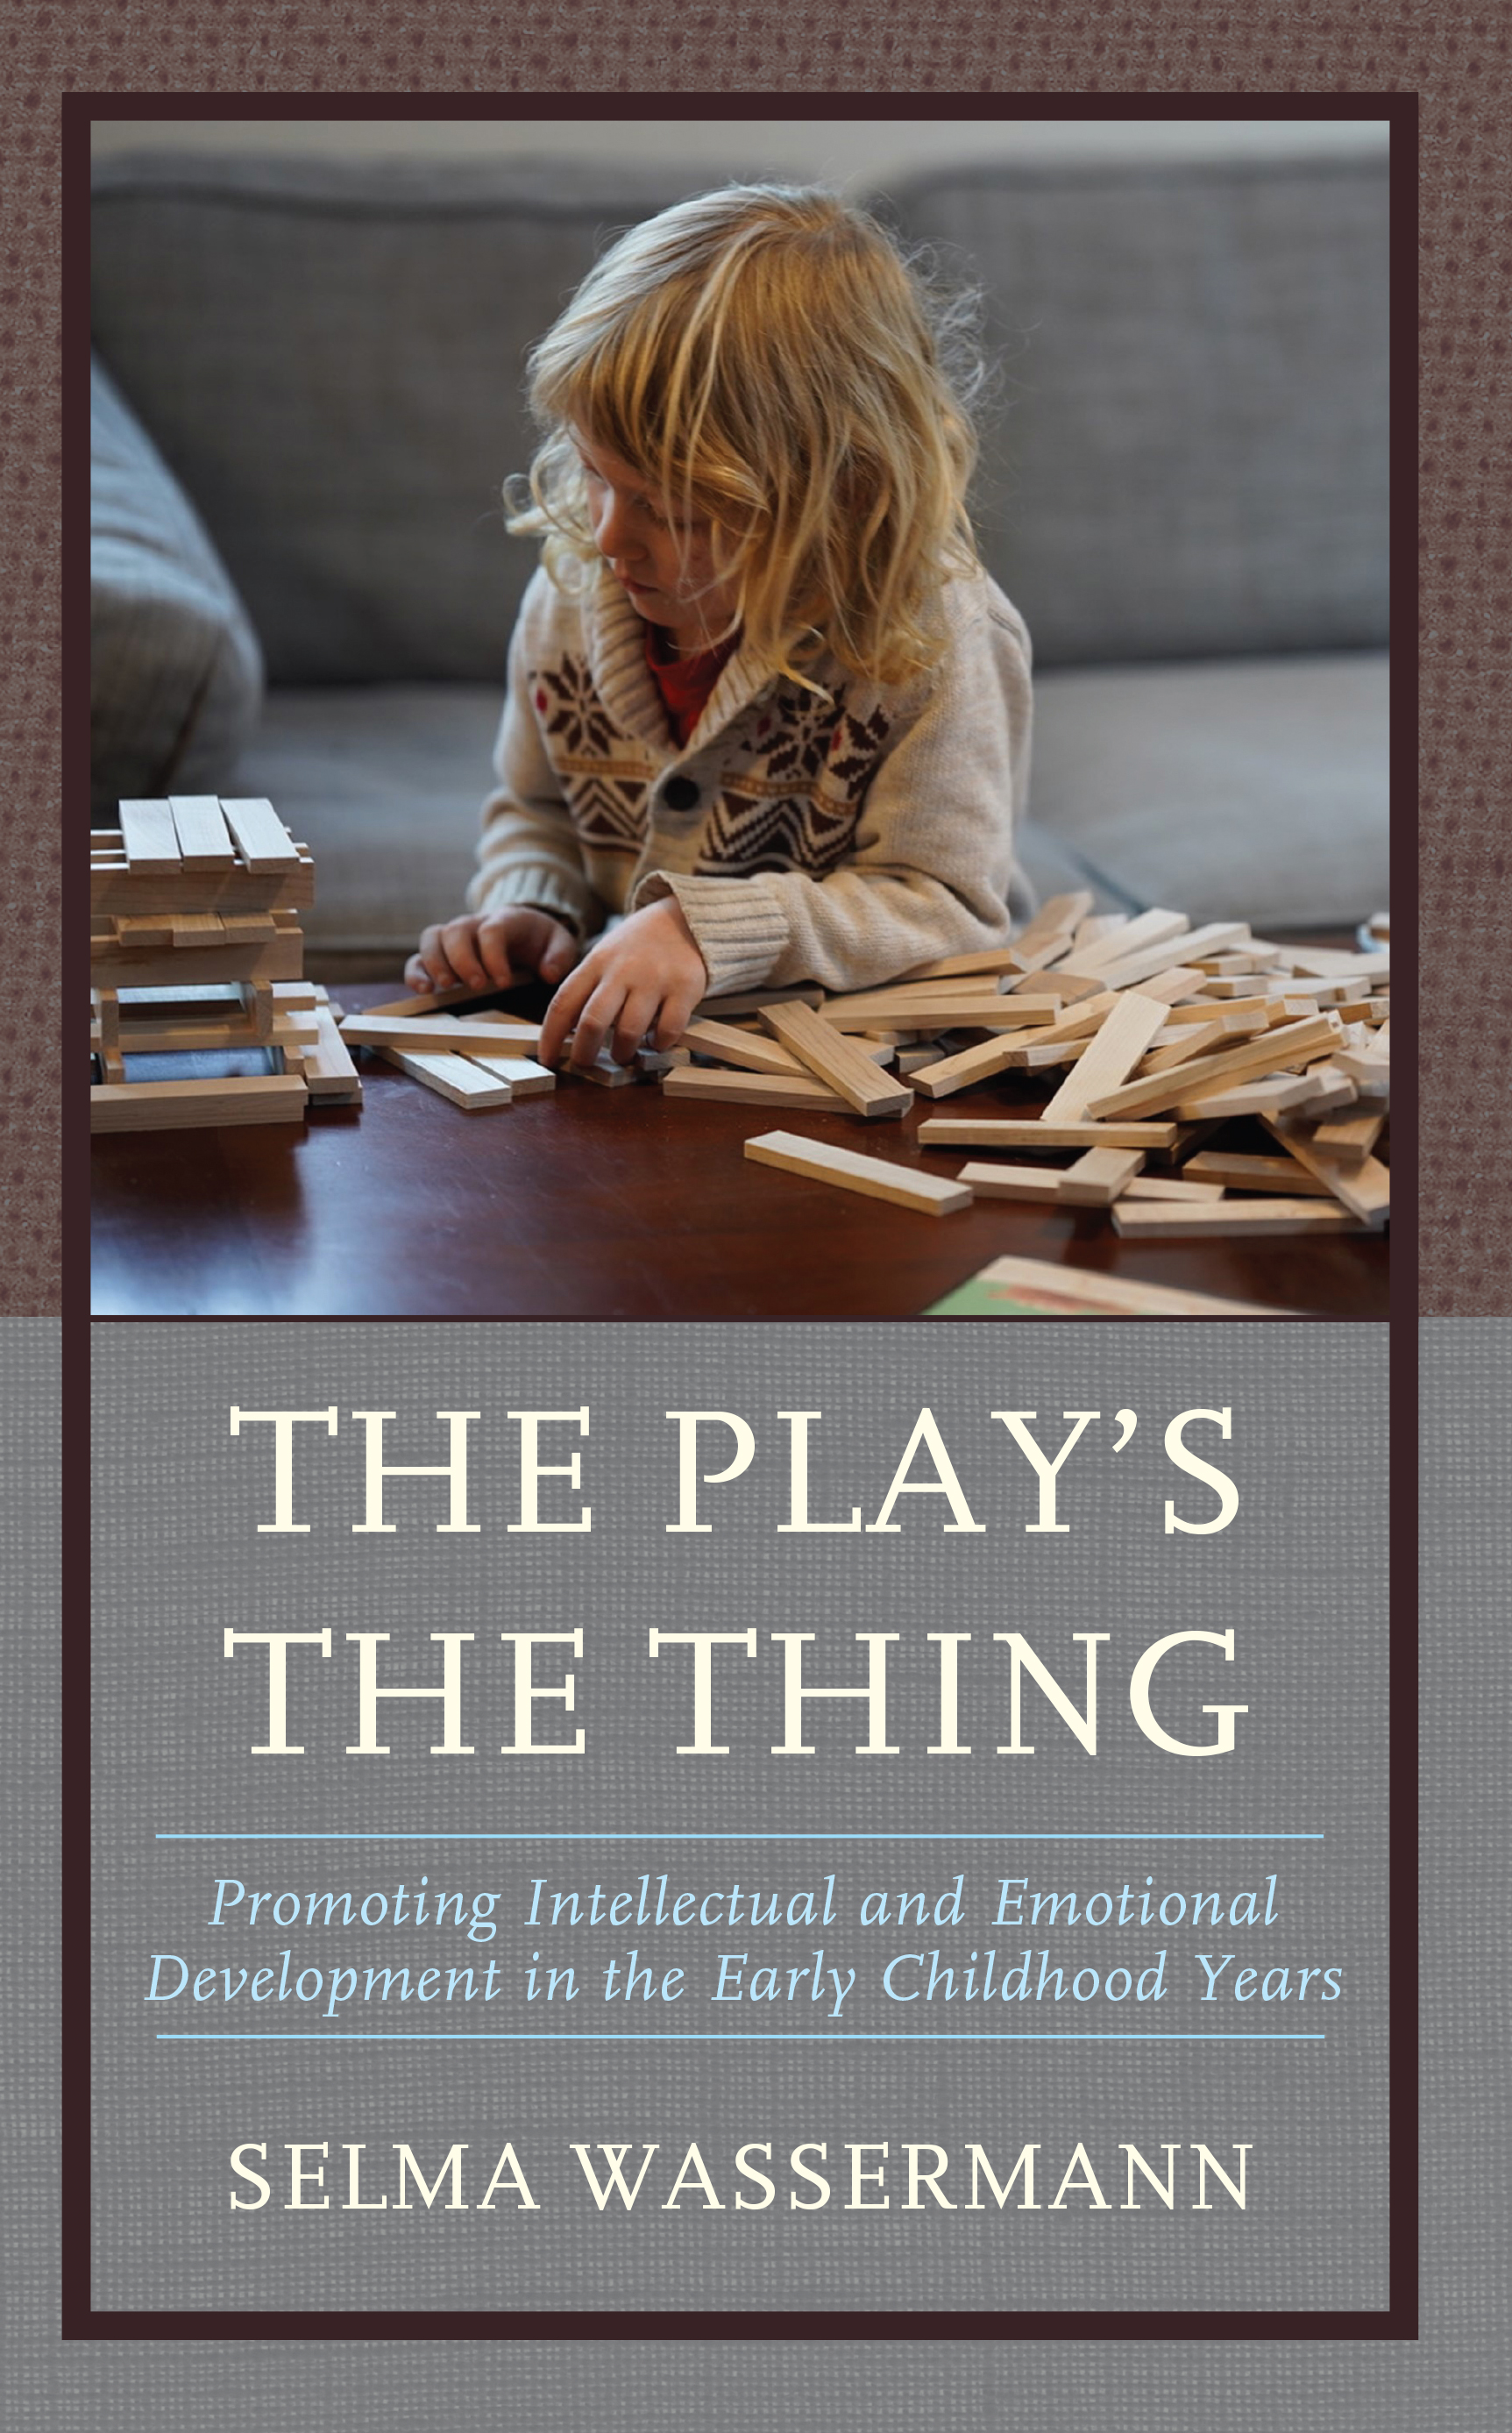 The Play's the Thing: Promoting Intellectual and Emotional Development in the Early Childhood Years